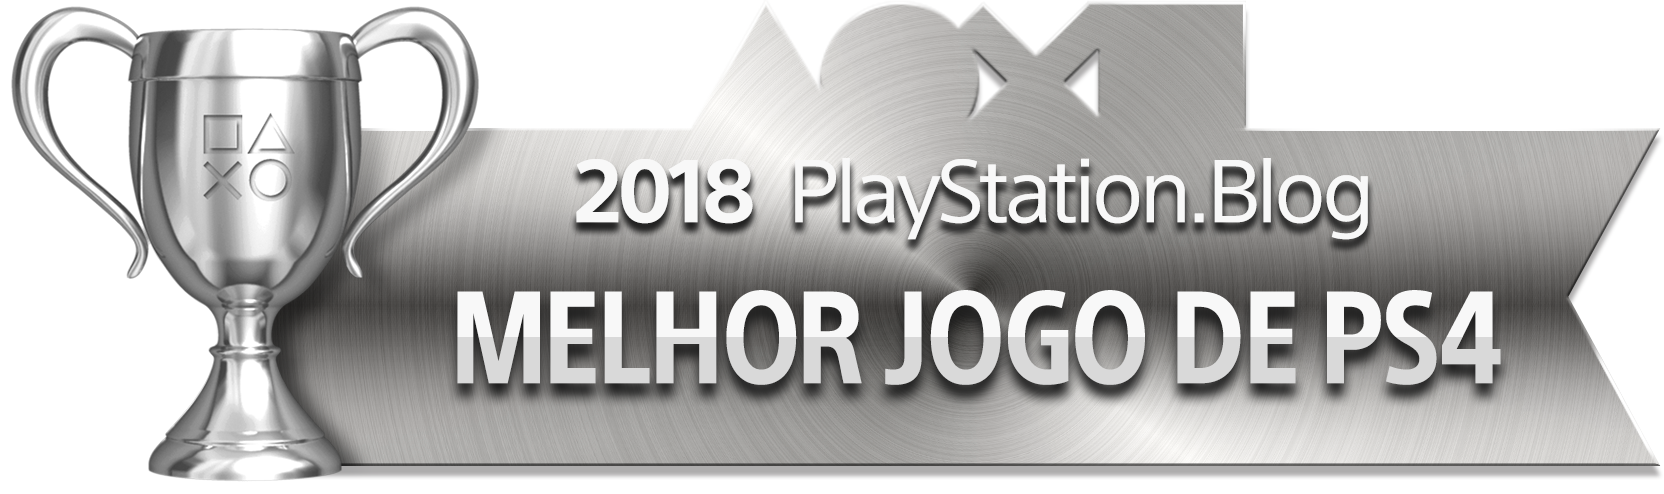 Best PS4 Game - Silver